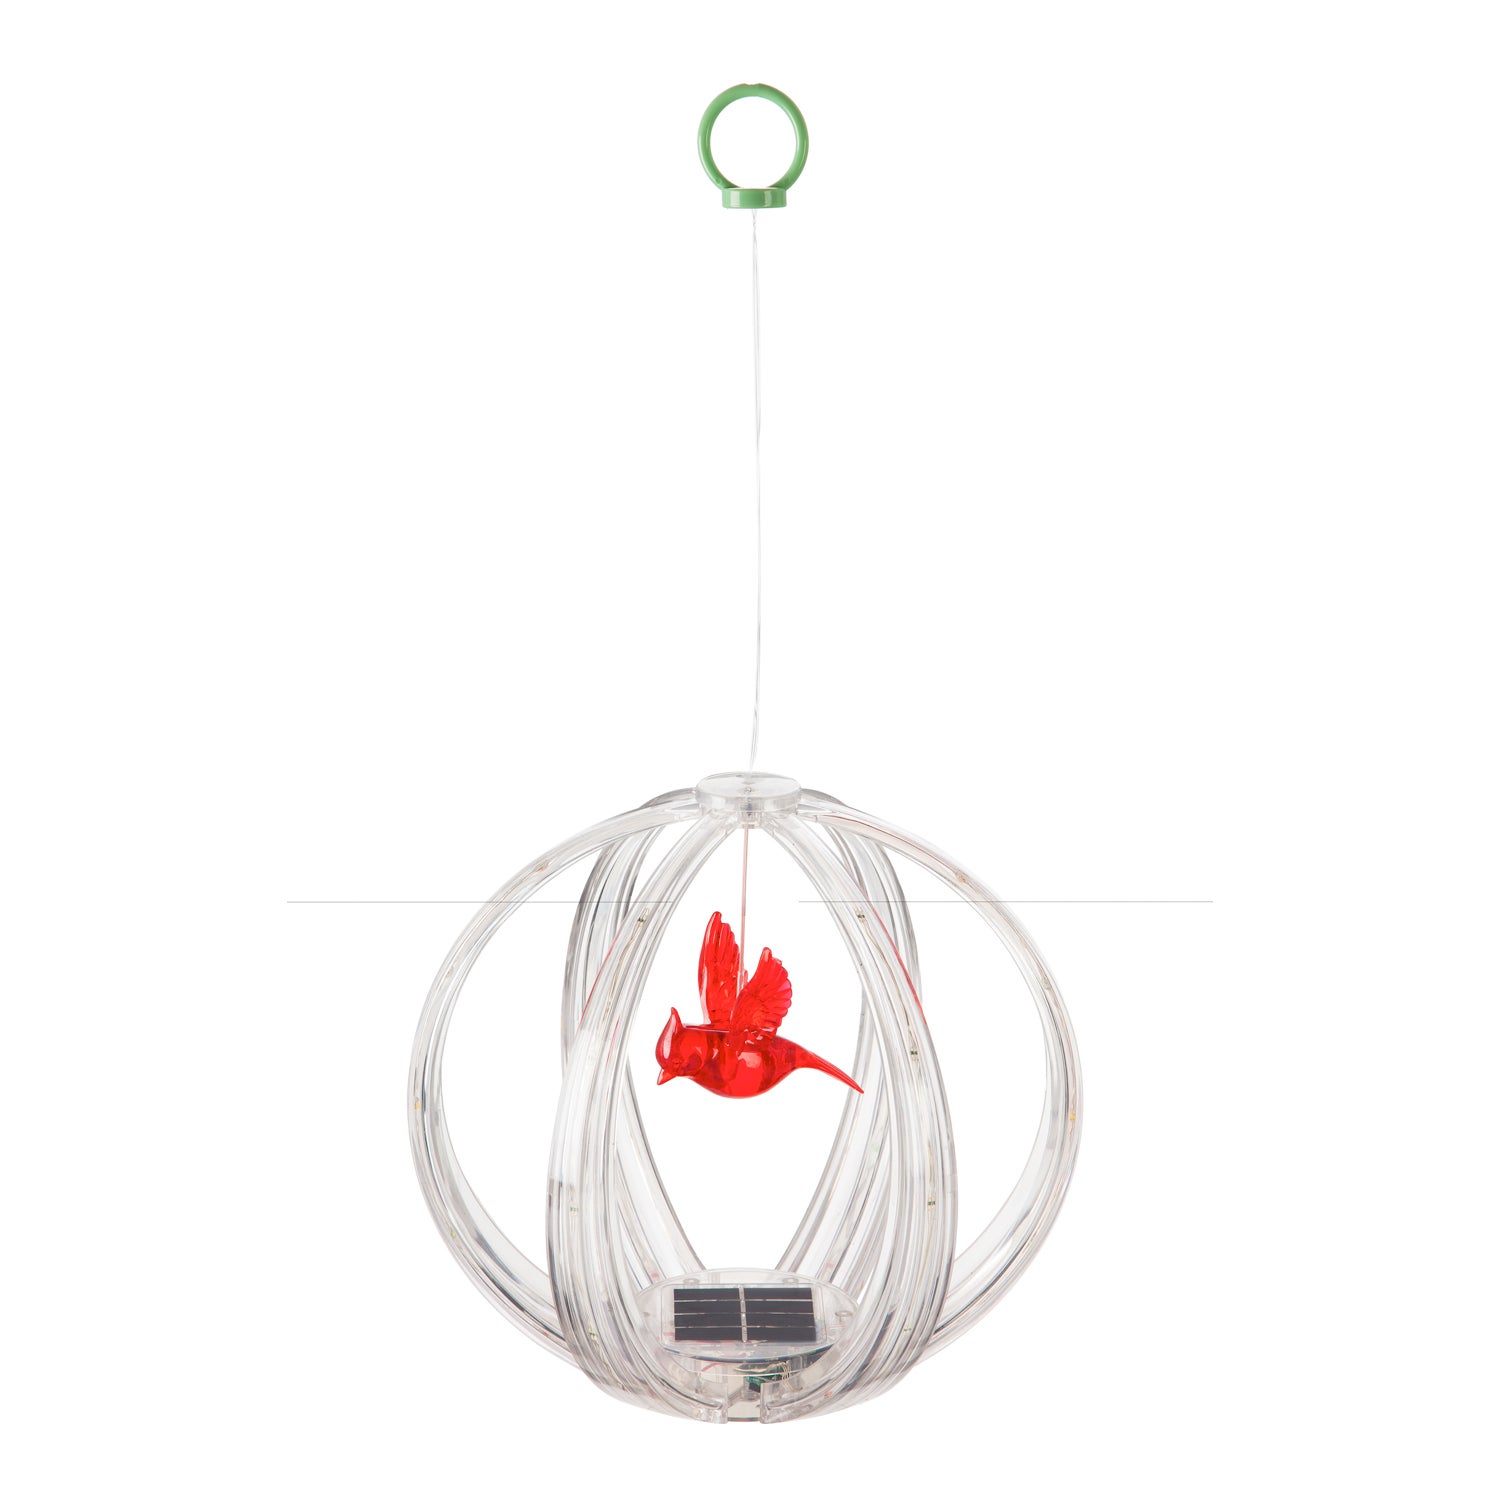 Cardinal Solar Mobile Sphere with Multicolor Chasing Light Display